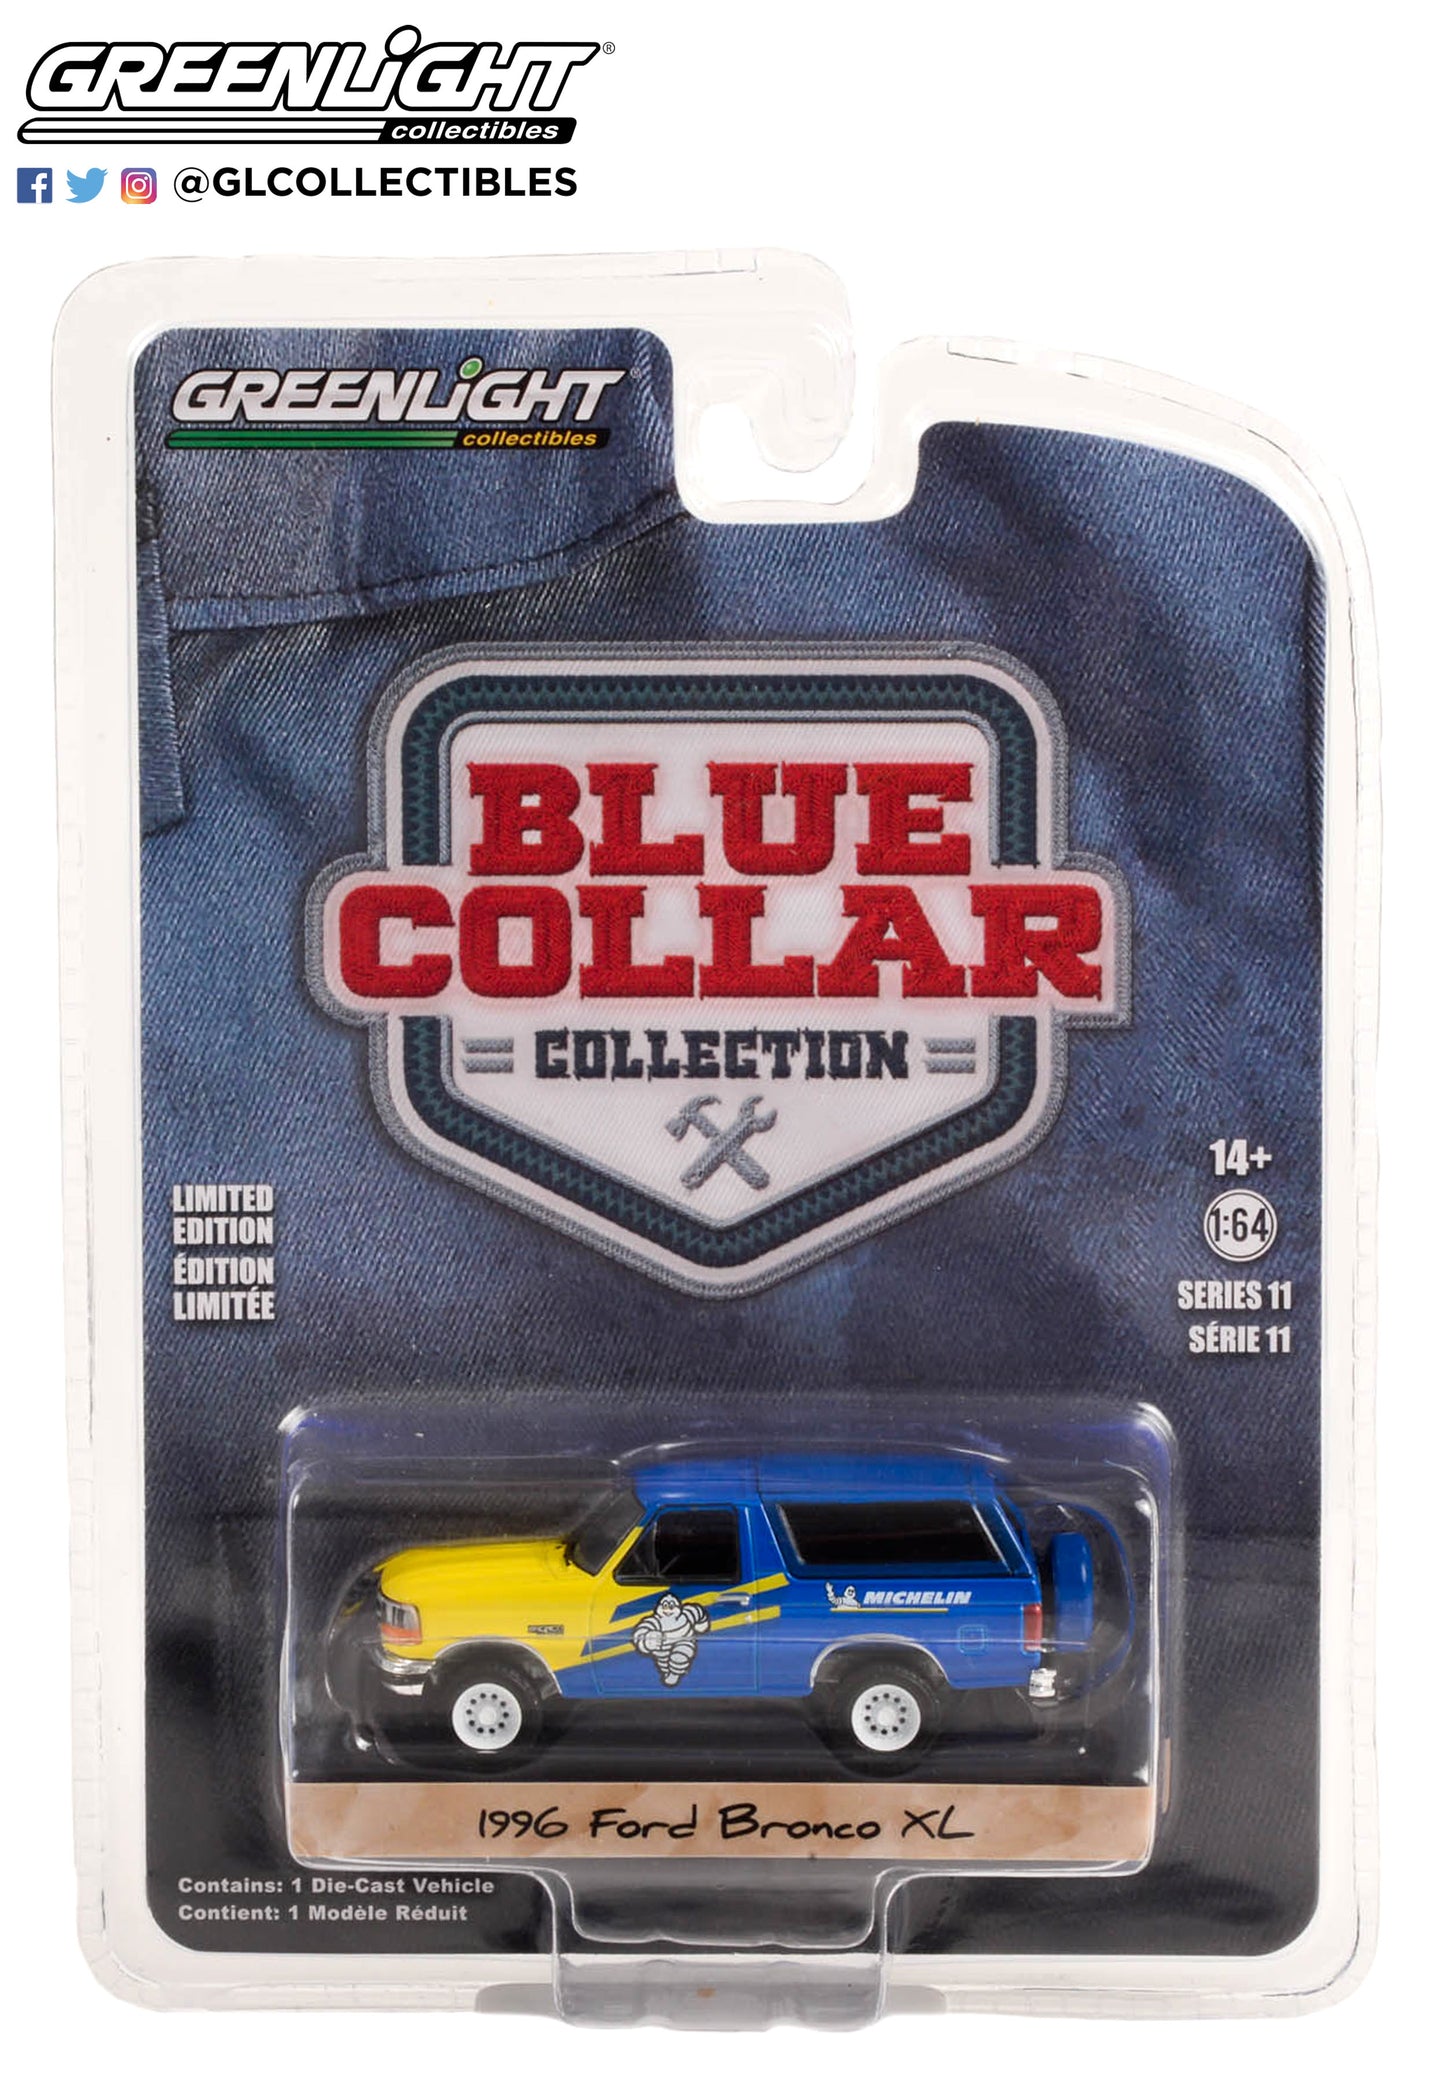 GreenLight 1:64 Blue Collar Collection Series 11 - 1996 Ford Bronco XL - Michelin Tires Solid Pack 35240-D